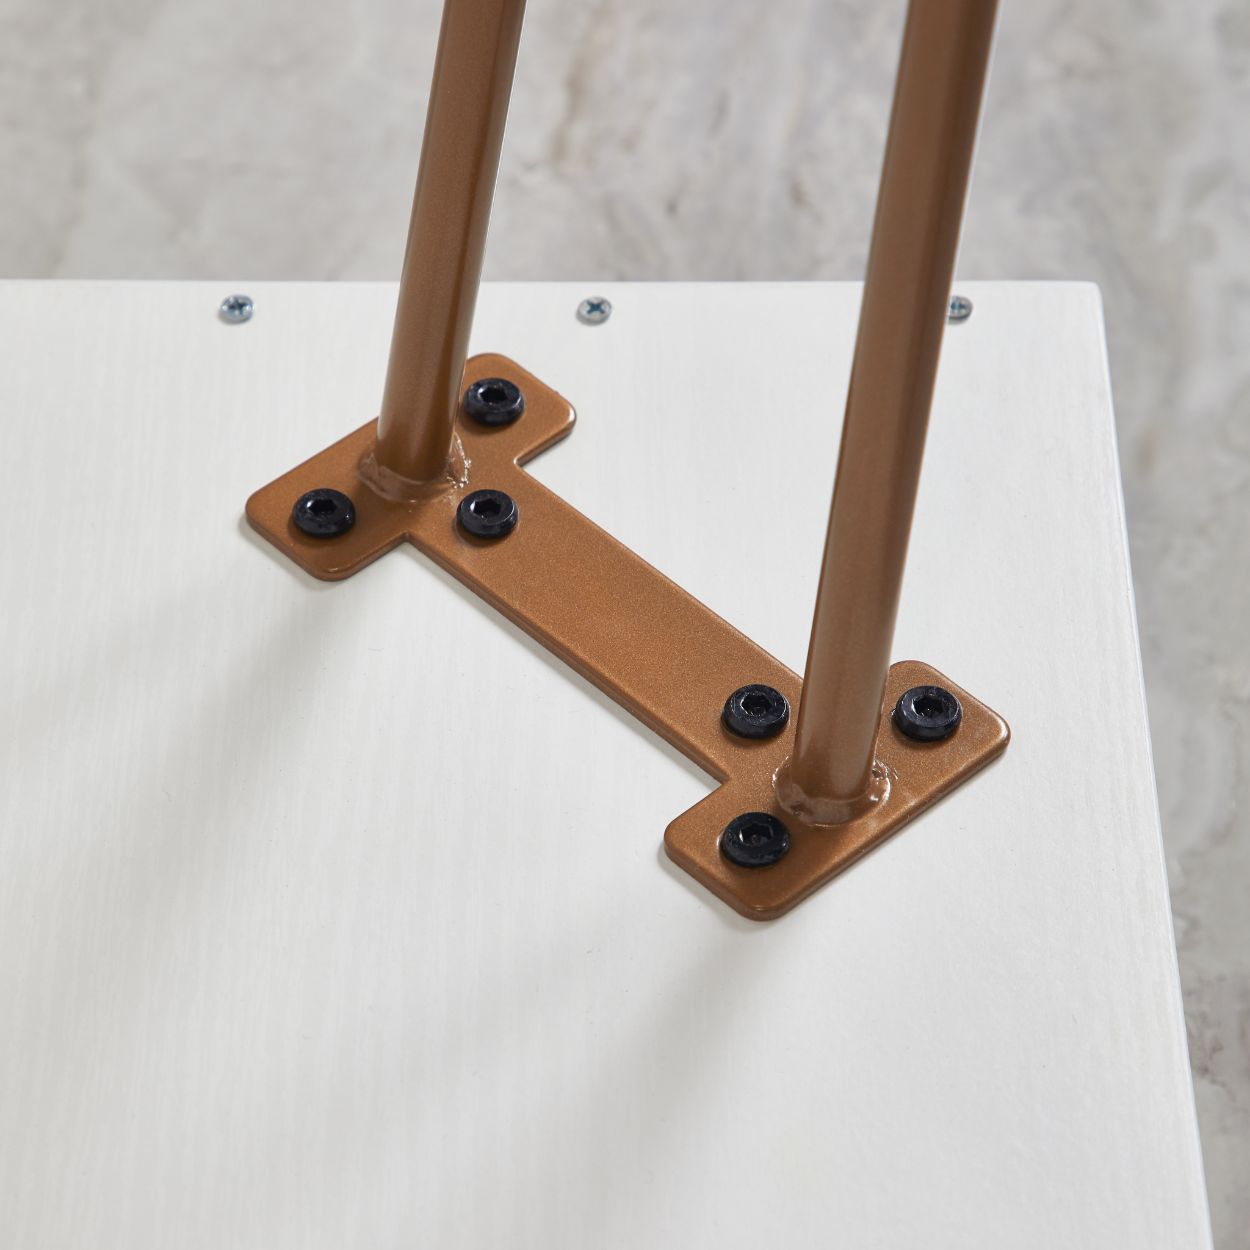 The desk legs can be easily attached to the bottom of the table, makes it very easy for assembly